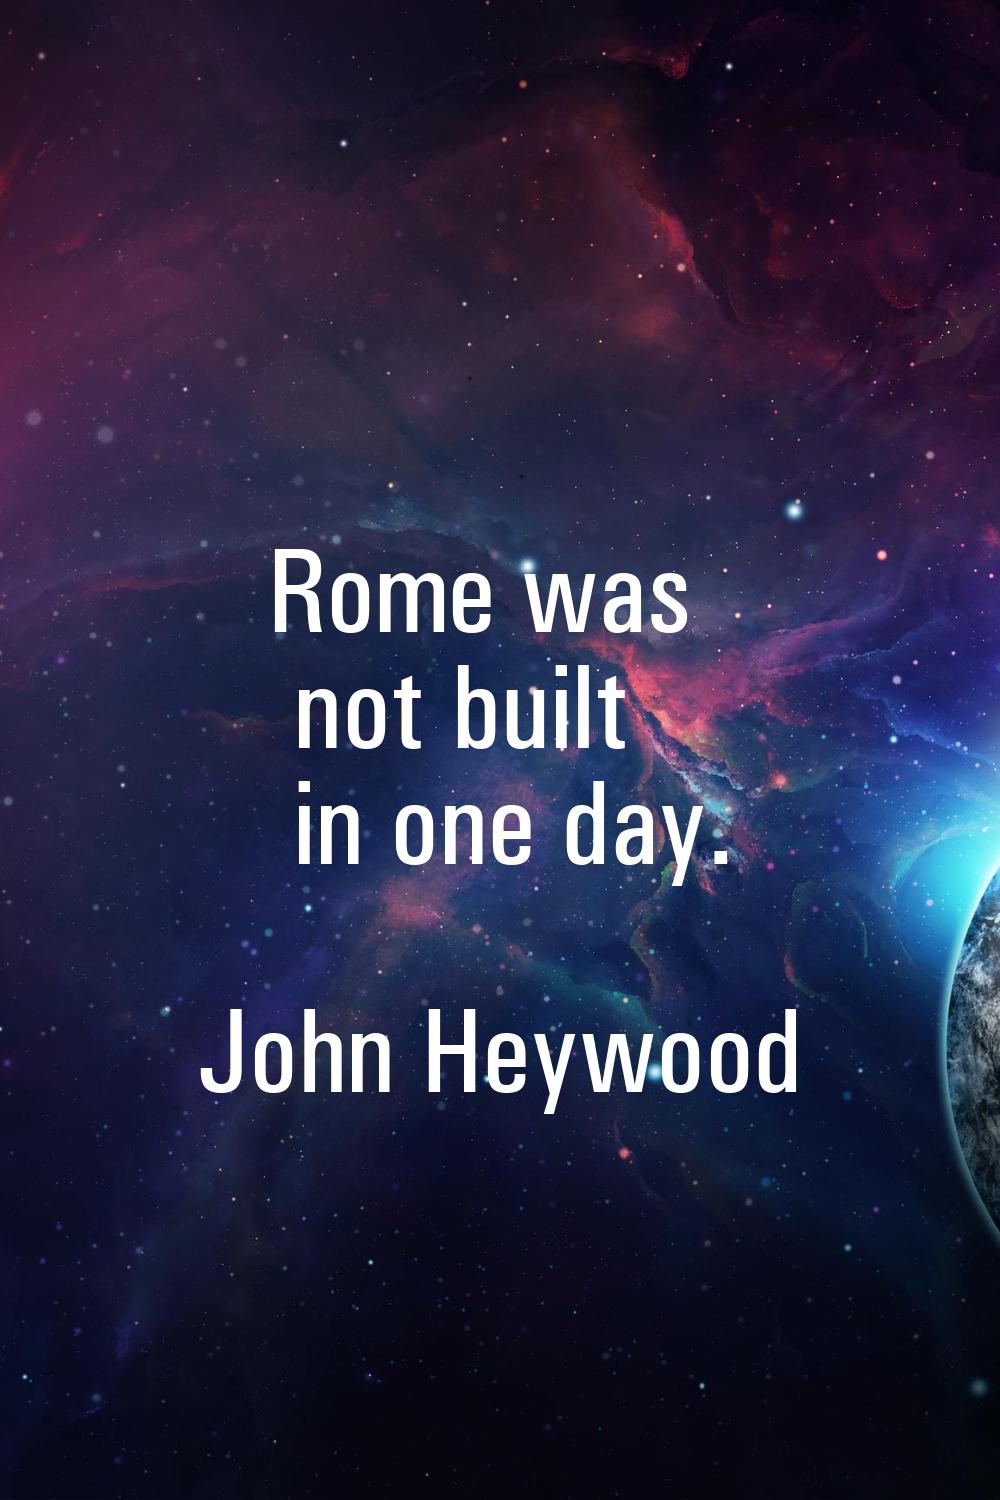 Rome was not built in one day.